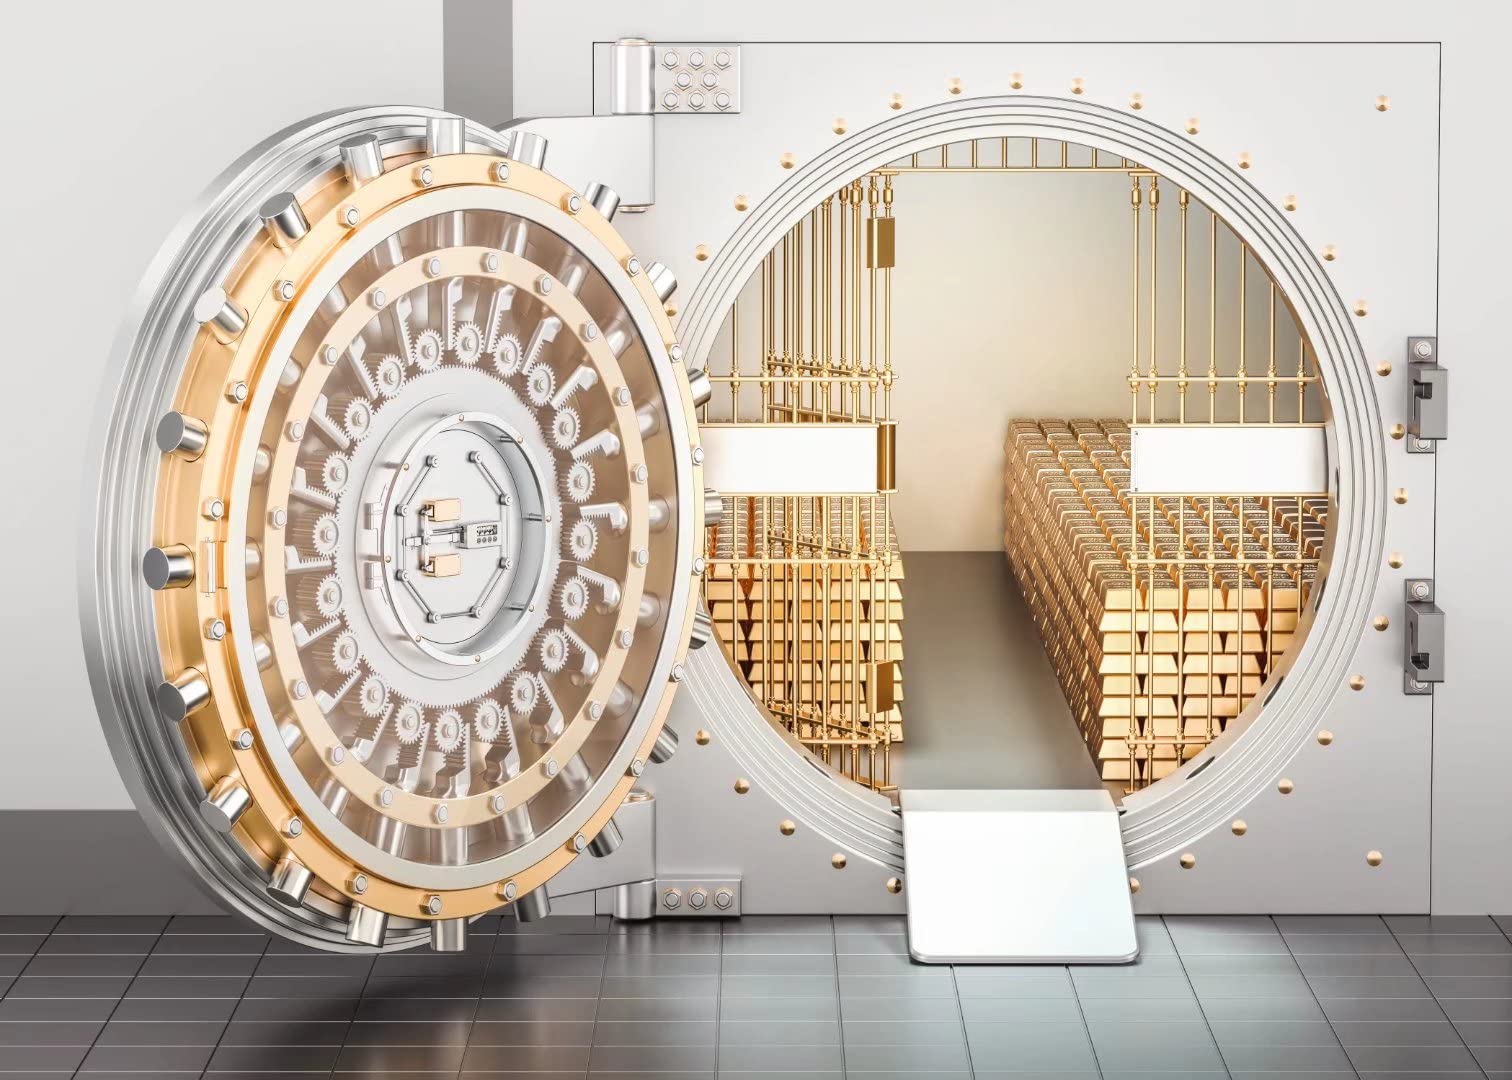 Gold bars in a secure vault